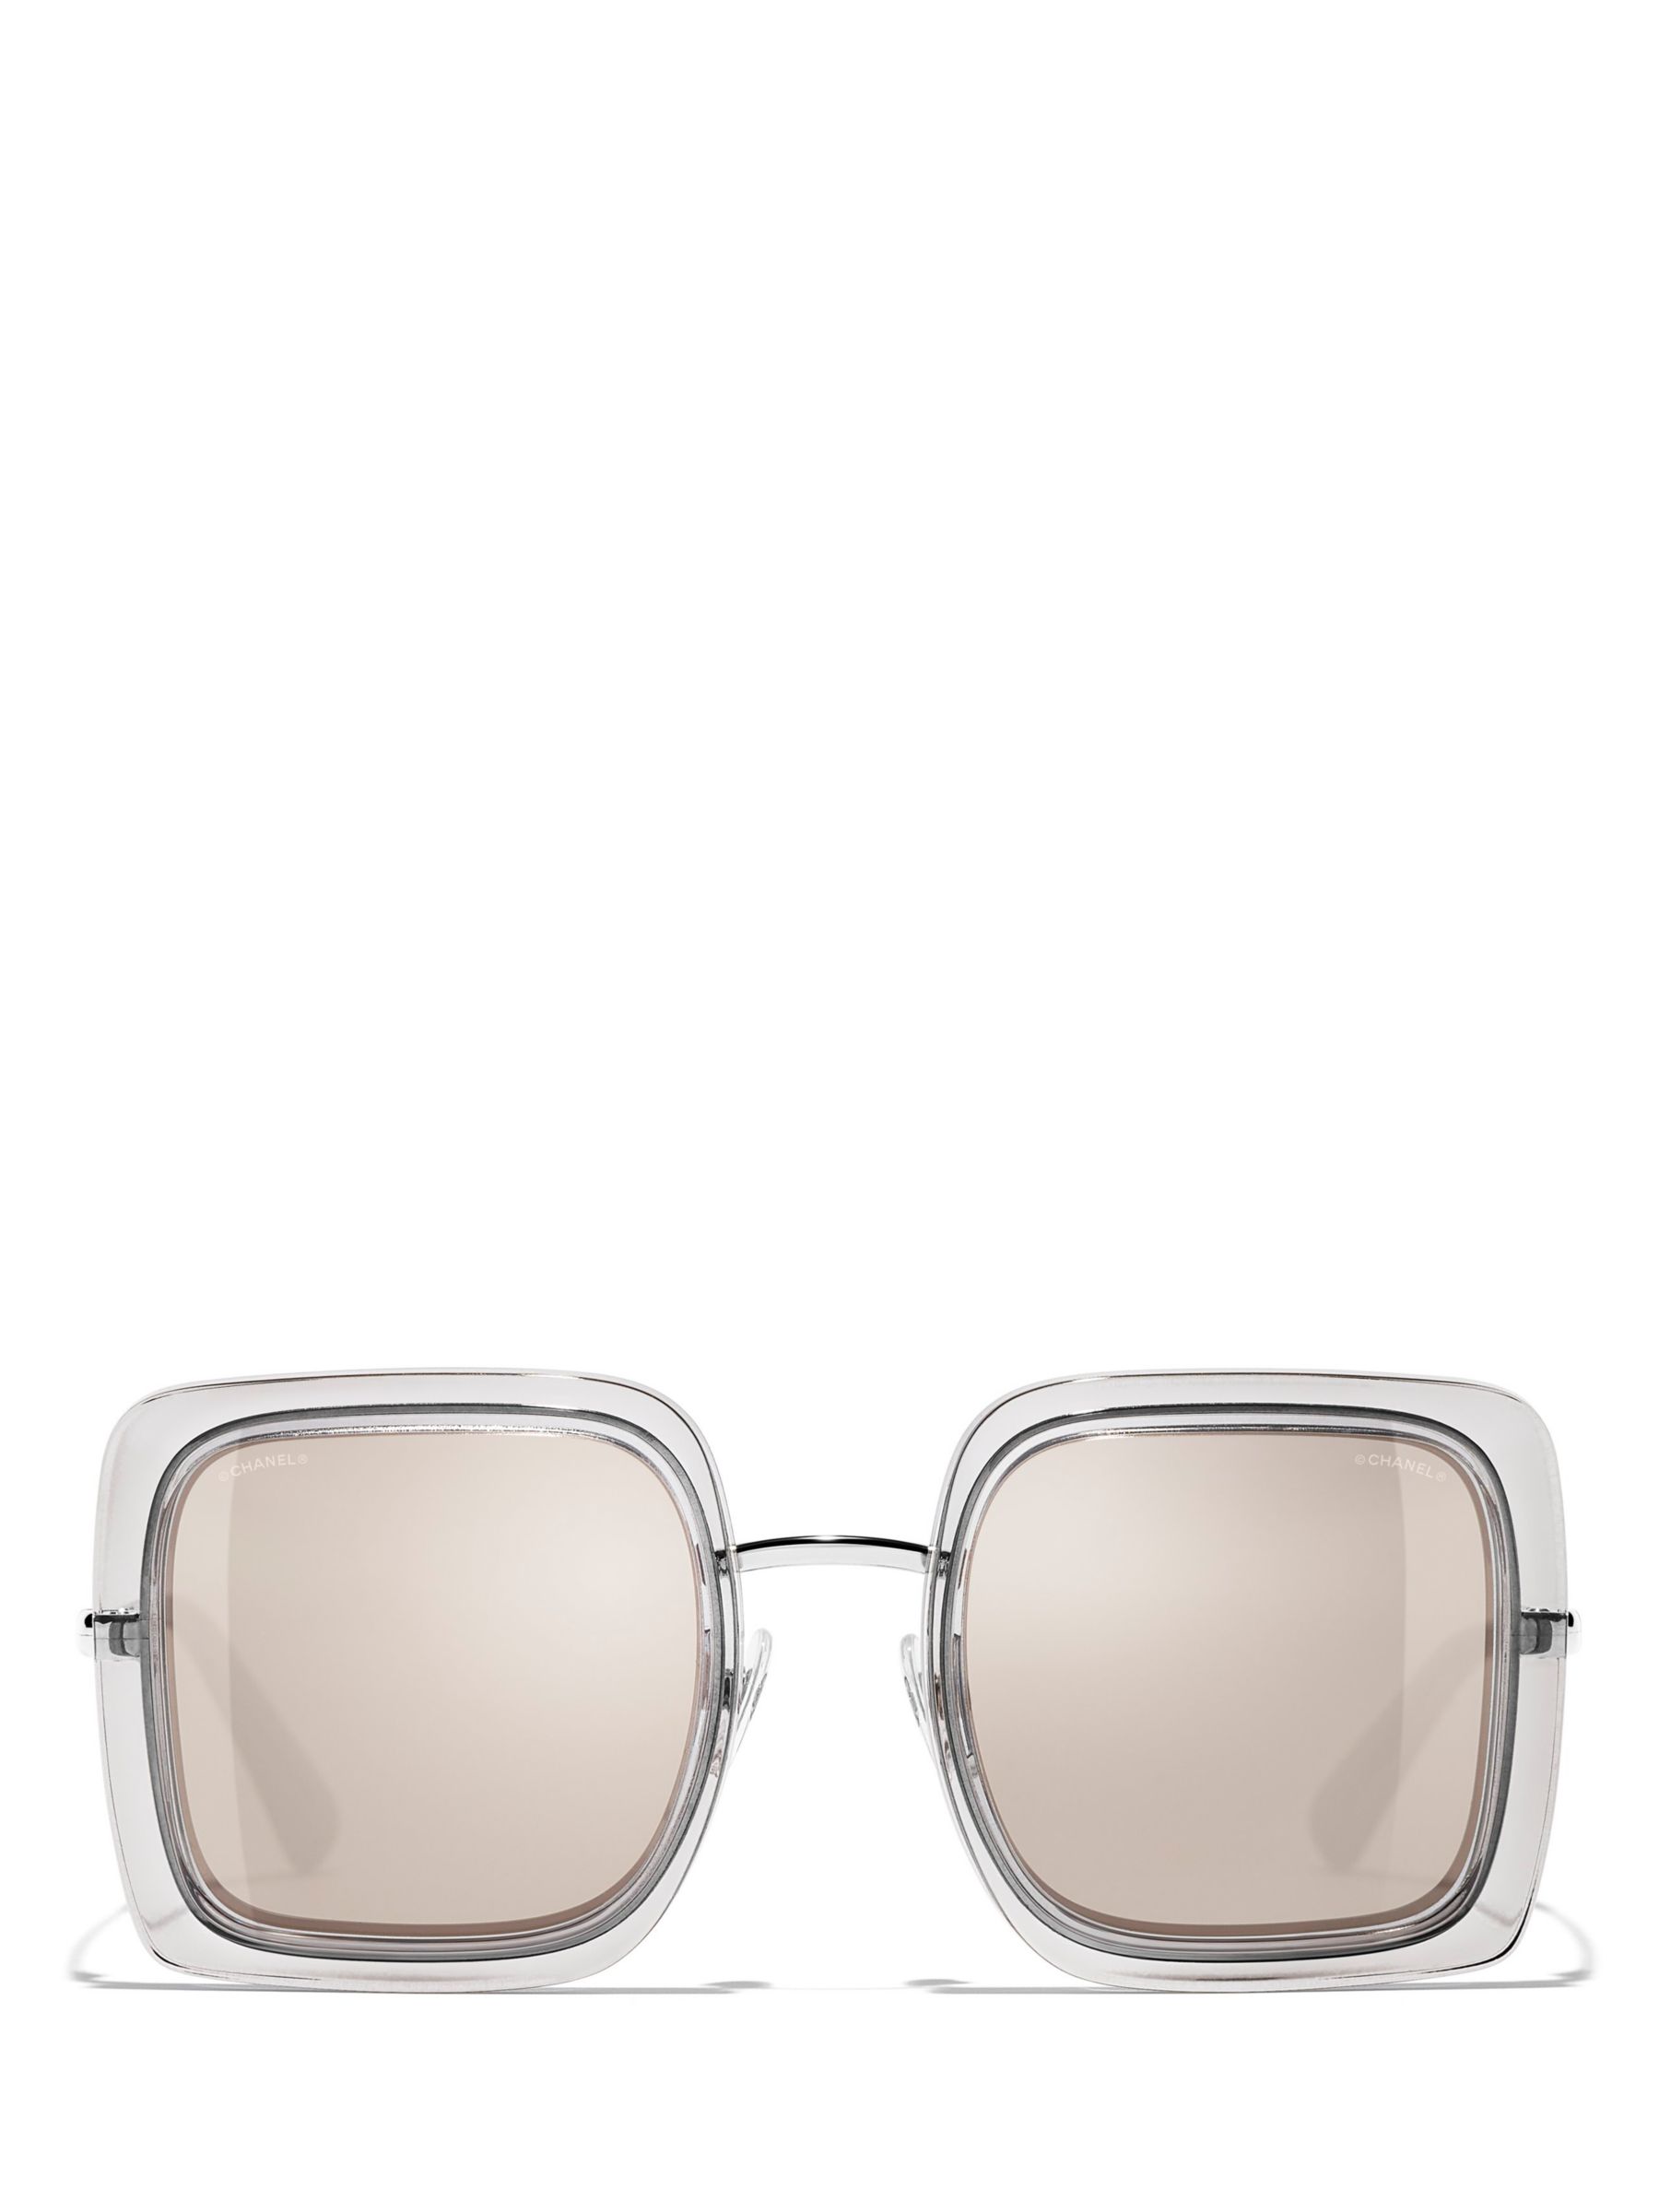 CHANEL Square Sunglasses CH4240 Grey/Mirror Clear at John Lewis & Partners